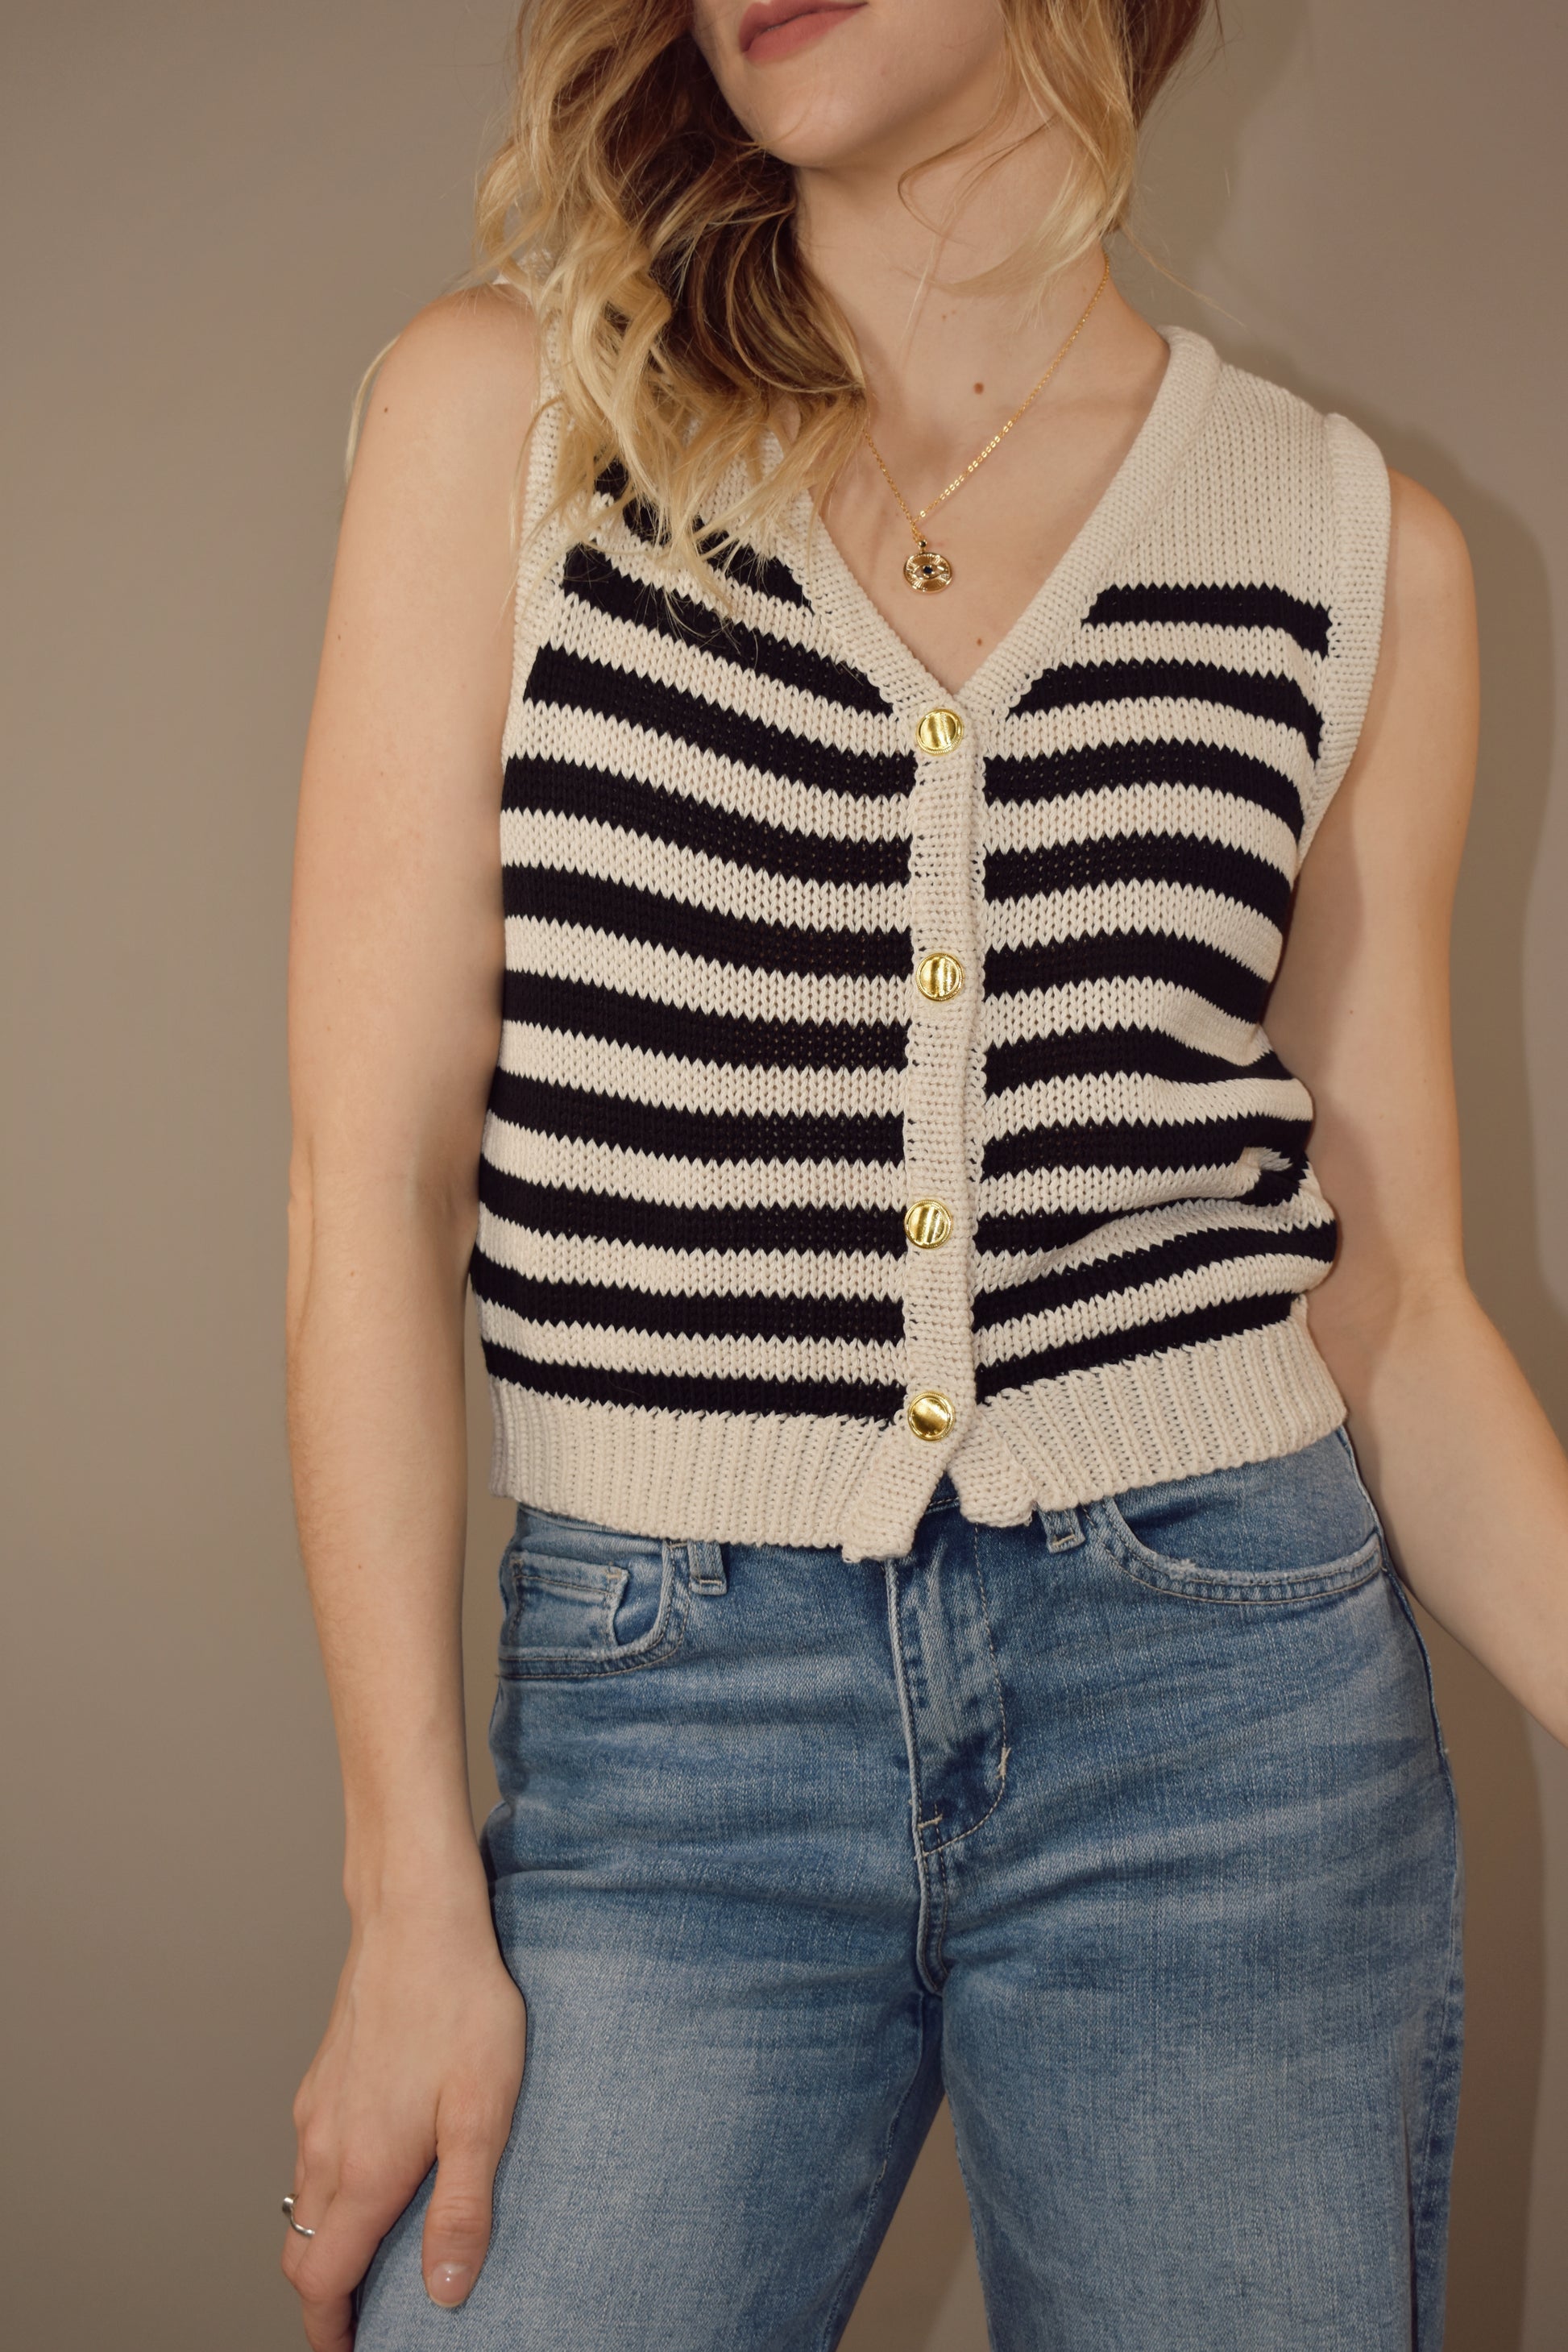 striped v neck sweater vest that has gold buttons down the front